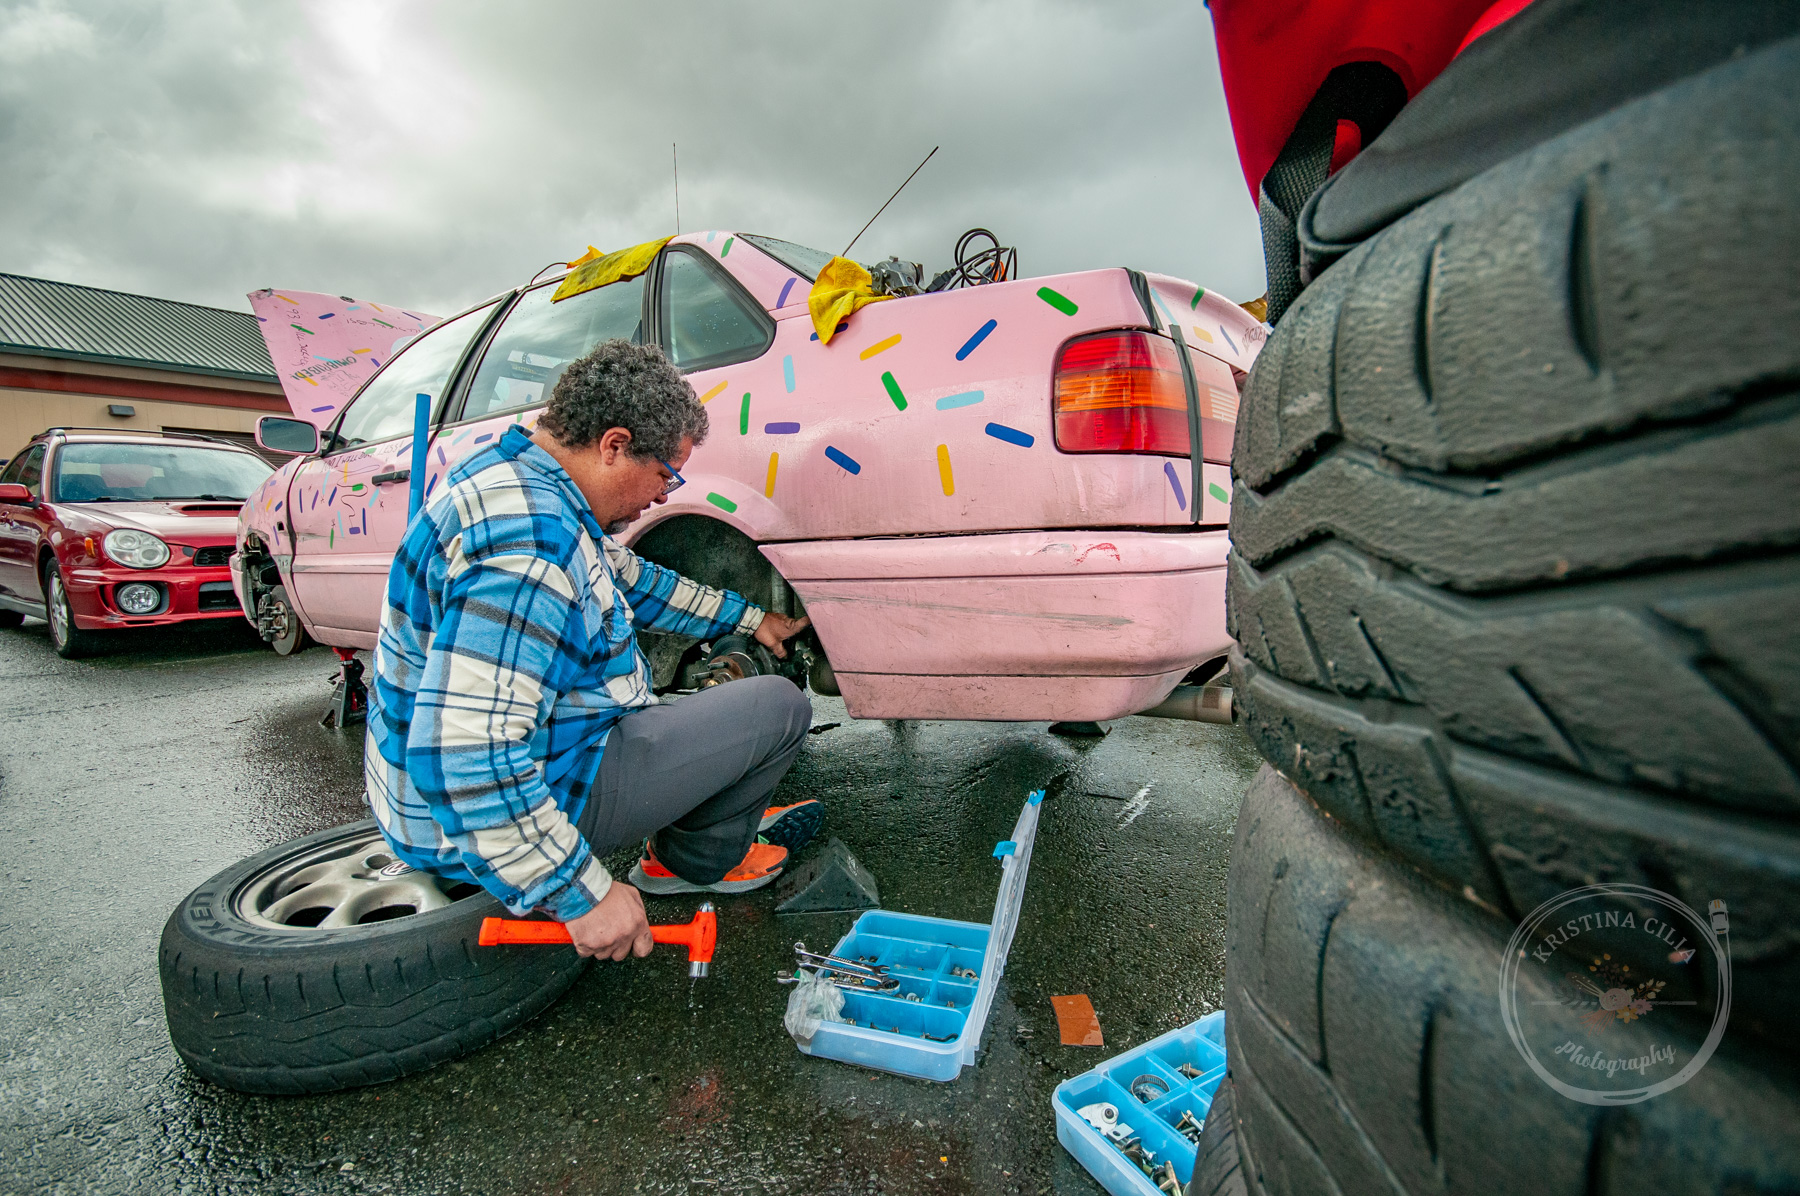 A member of the Big Pink team works on the brakes of their 1997 VW Passat Kristina Cilia